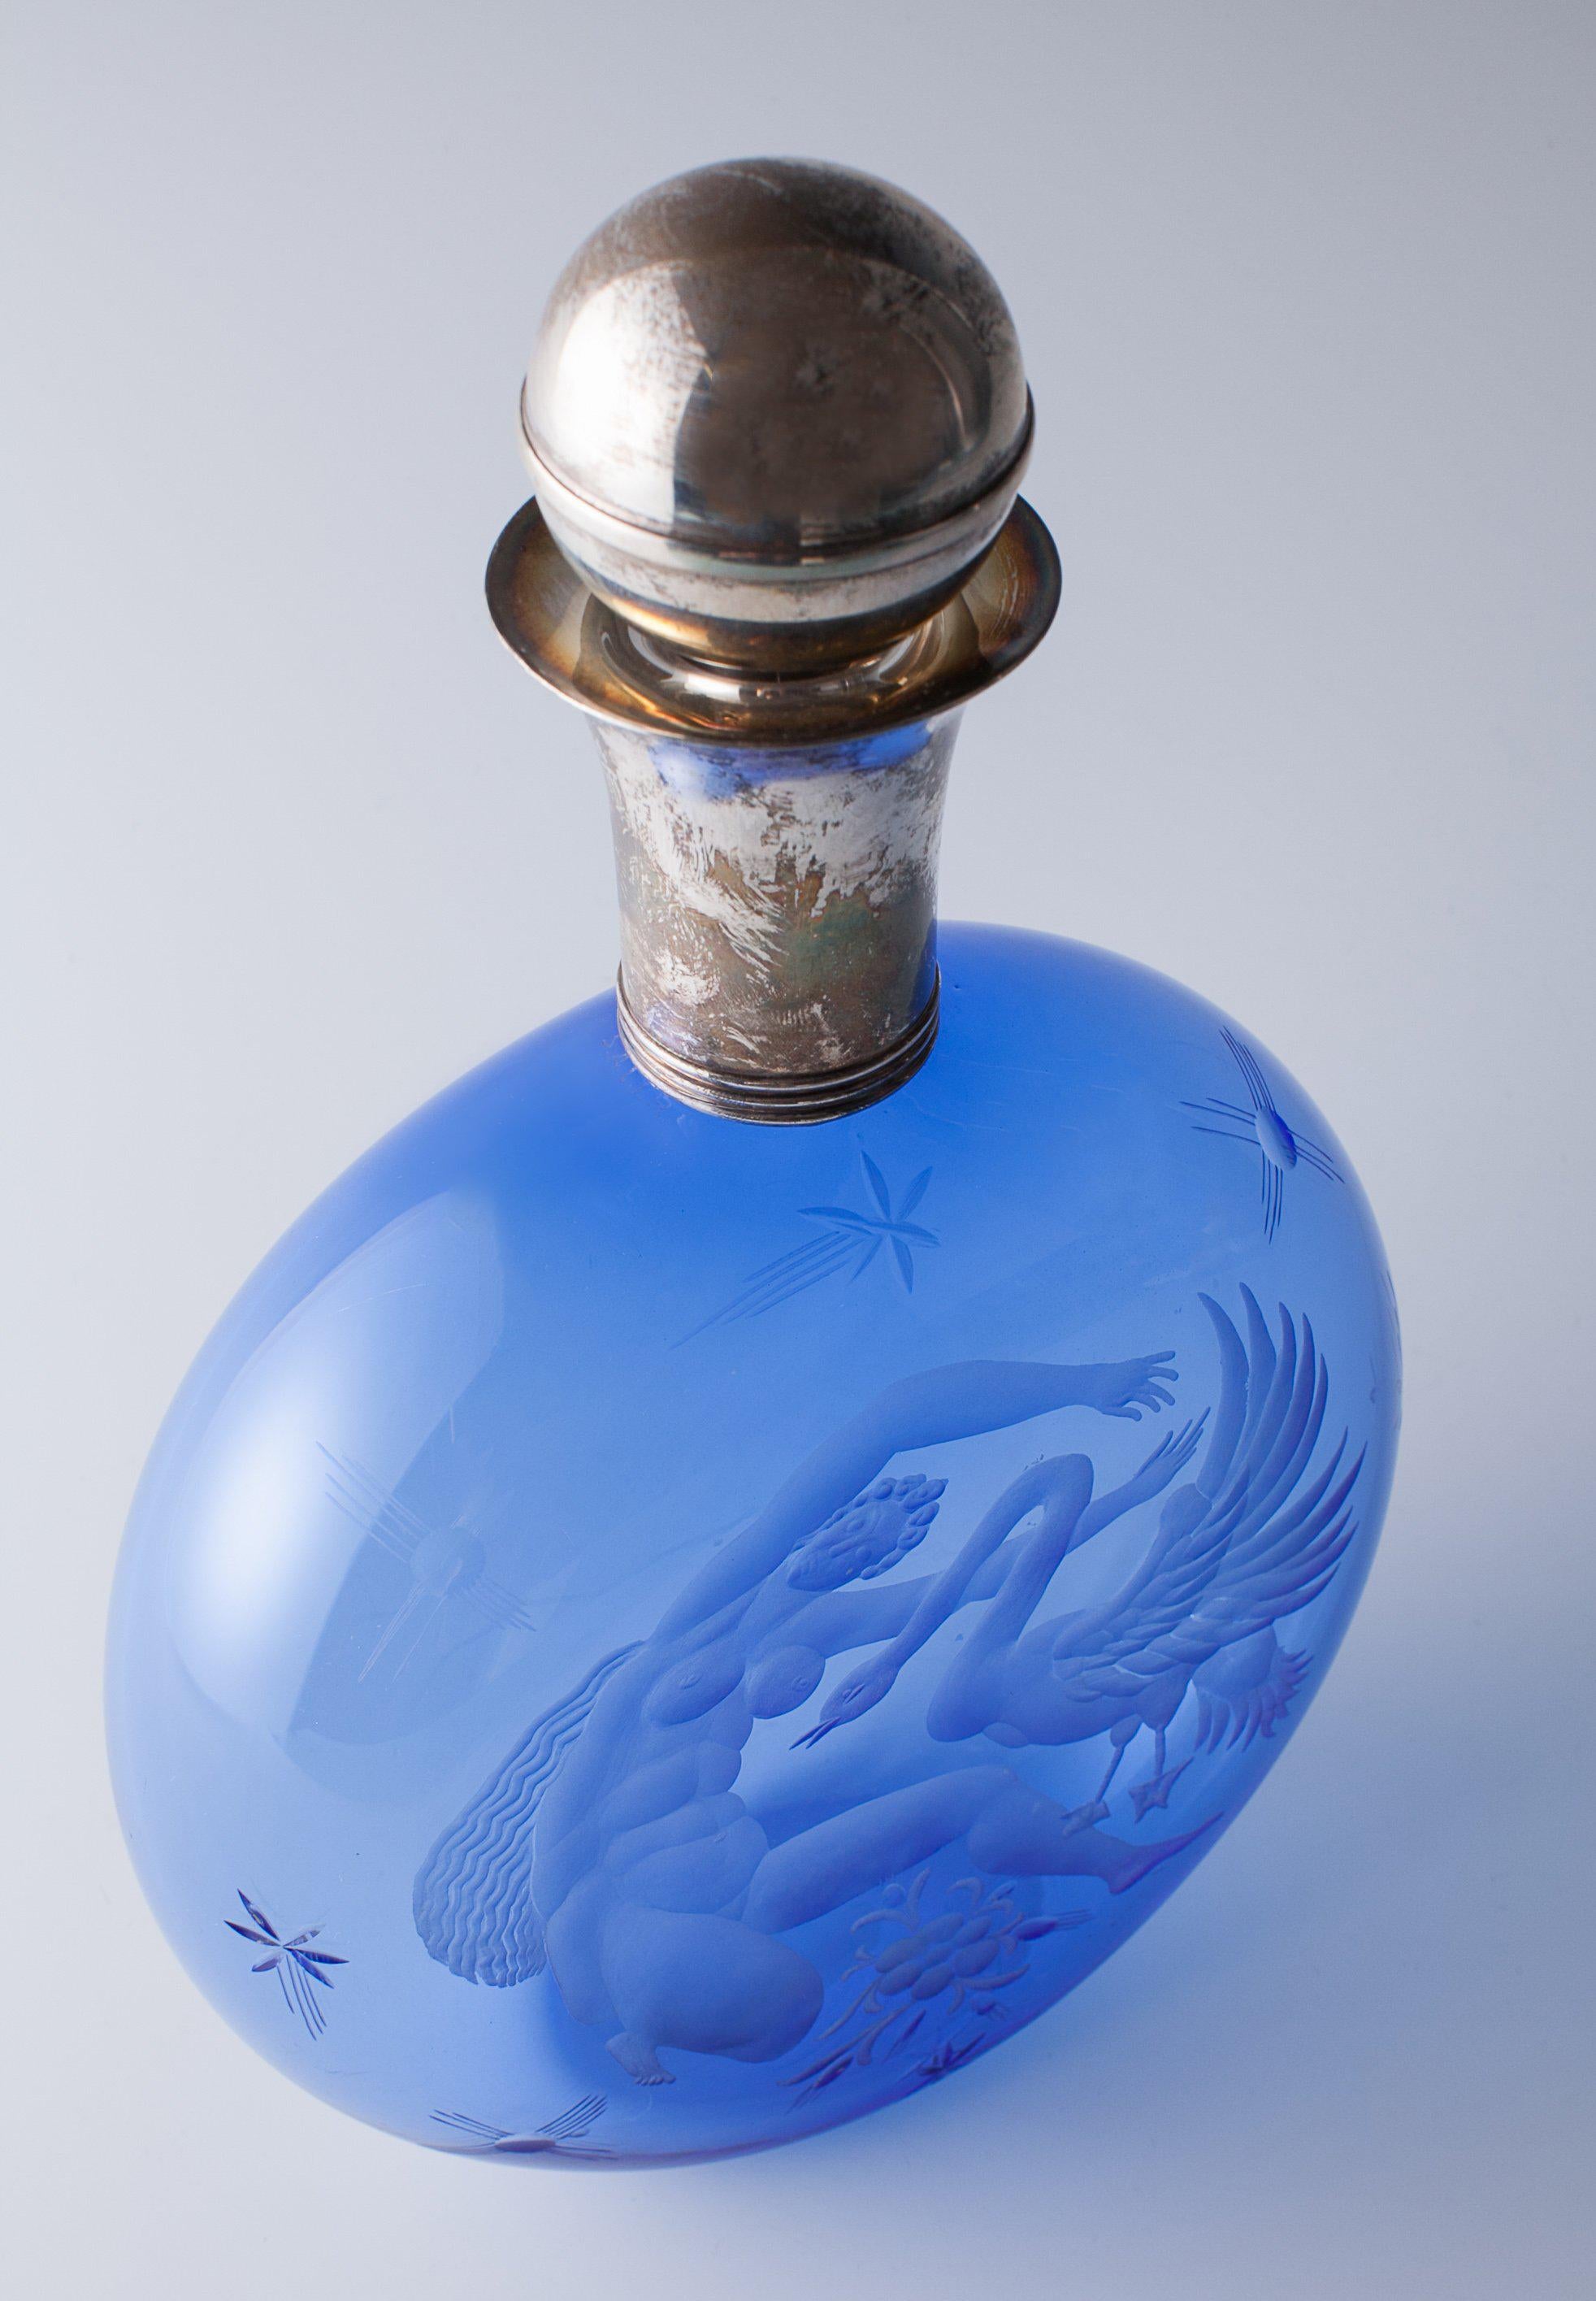 Guido Balsamo Stella. Bottle 'Leda and the swan' for S.A.L.I.R. Murano.
Date: circa 1940.
Condition: Very good.
Height (cm): 27.5.
Signed and silver stamped.